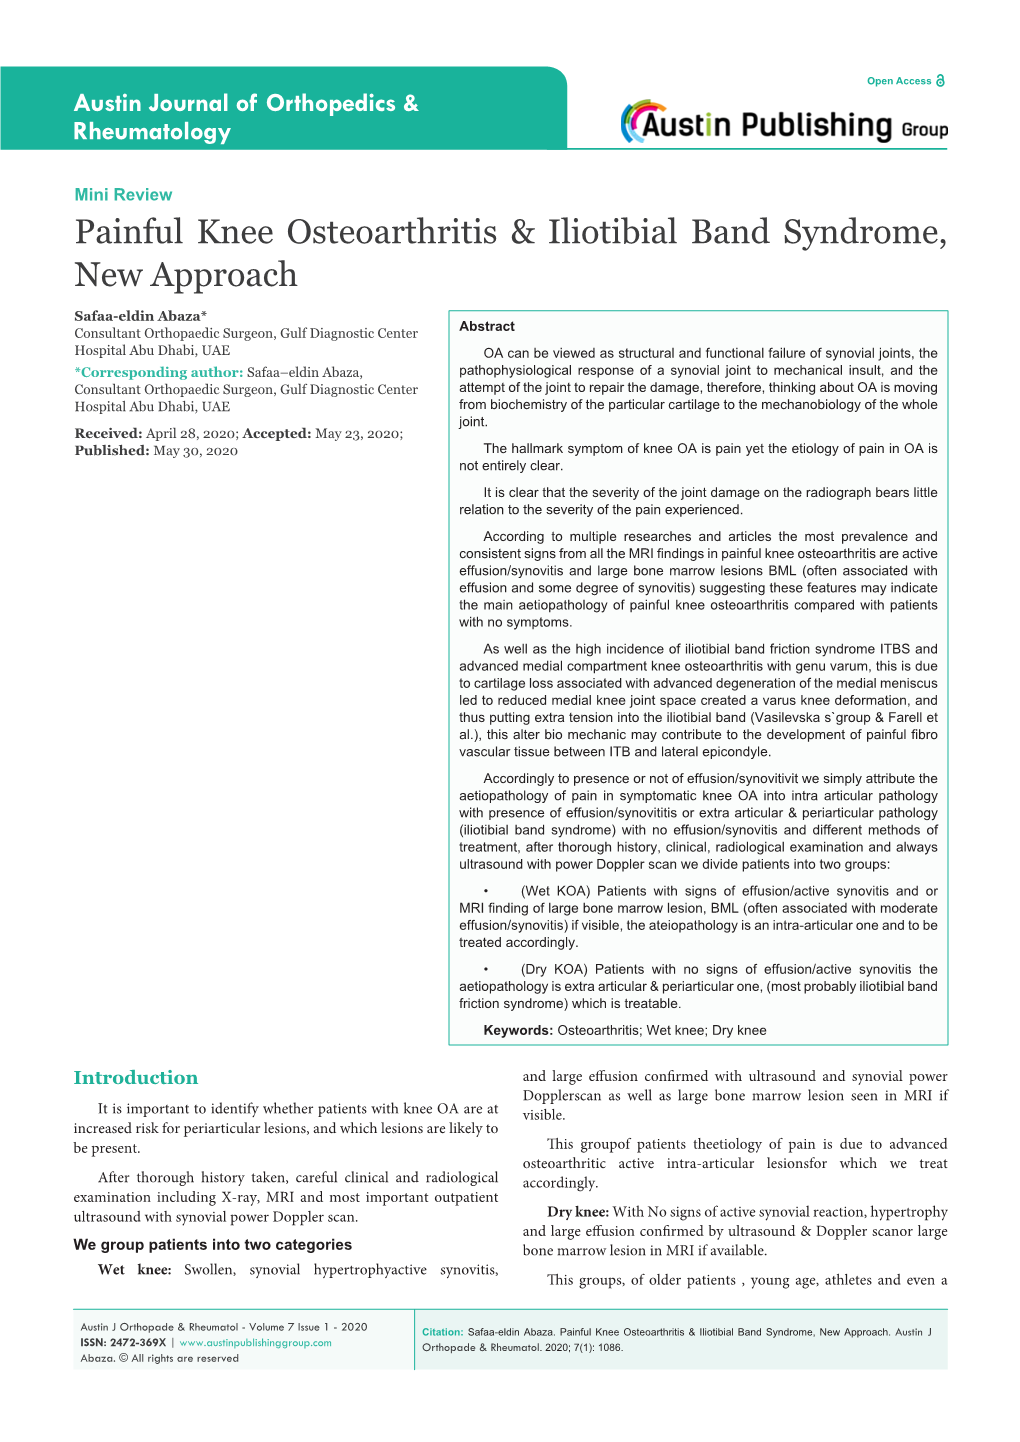 Painful Knee Osteoarthritis & Iliotibial Band Syndrome, New Approach